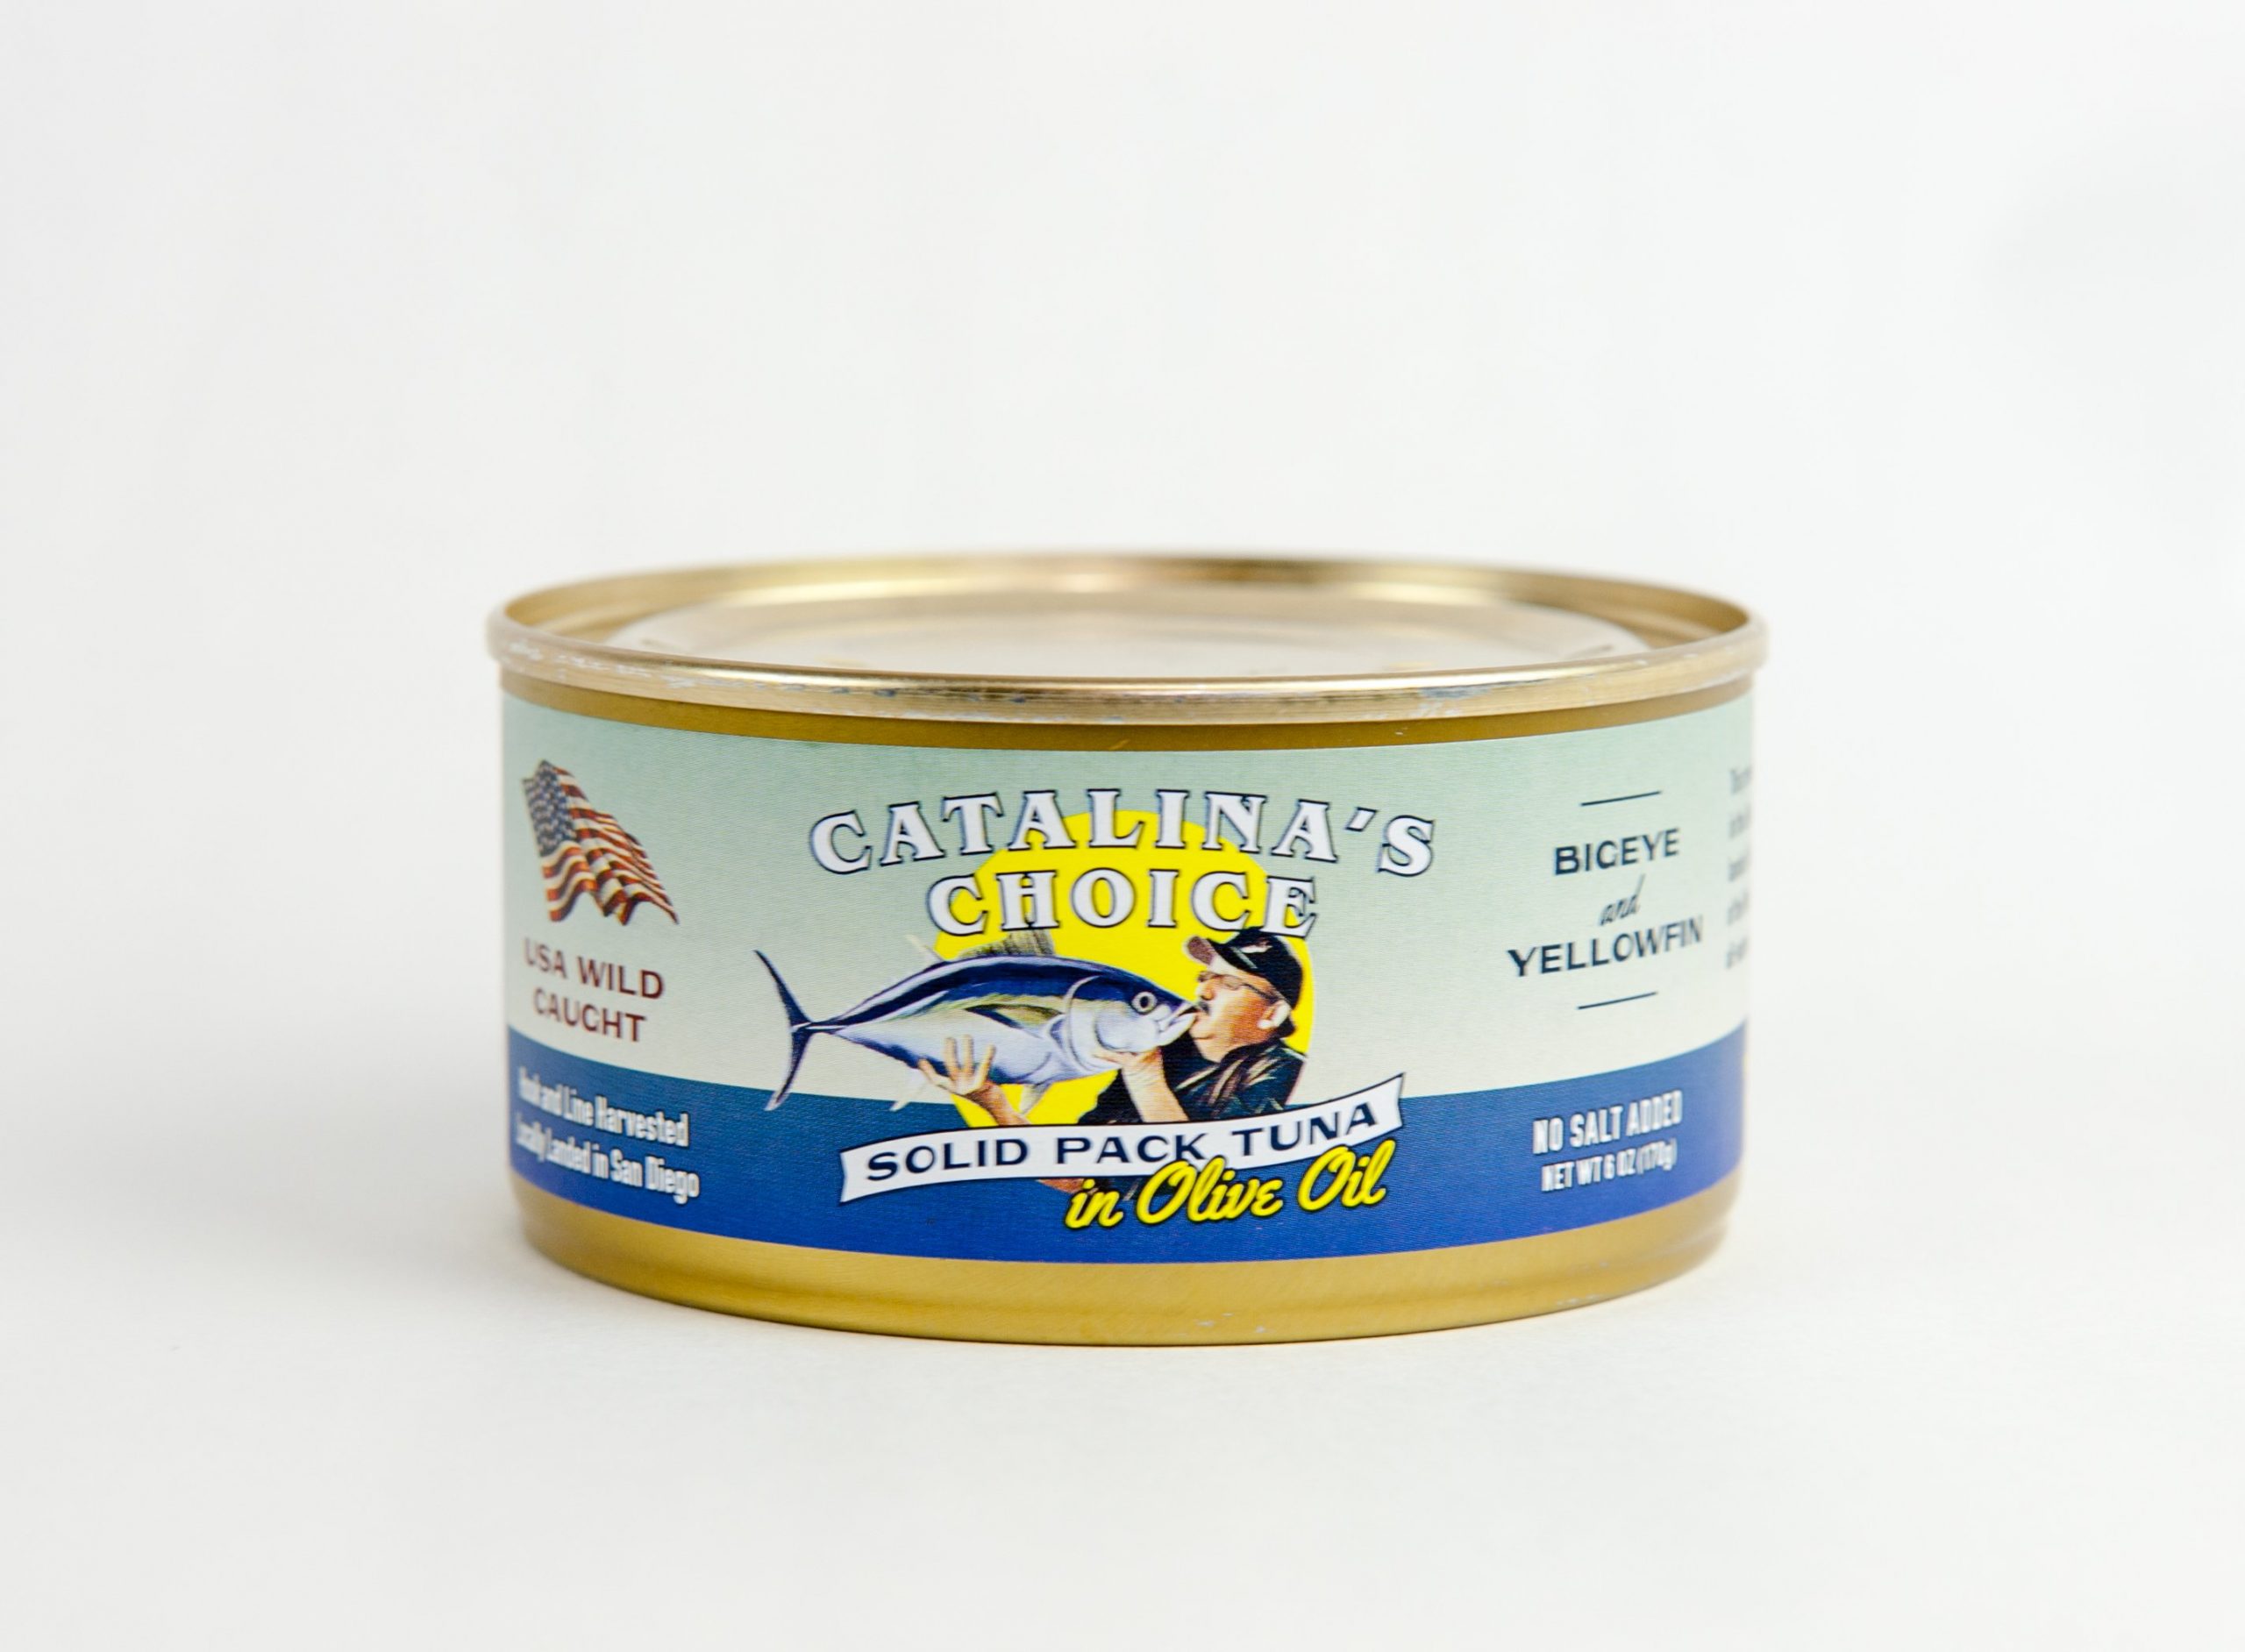 Buy Catalina's Choice Canned Tuna - Catalina Offshore - Online